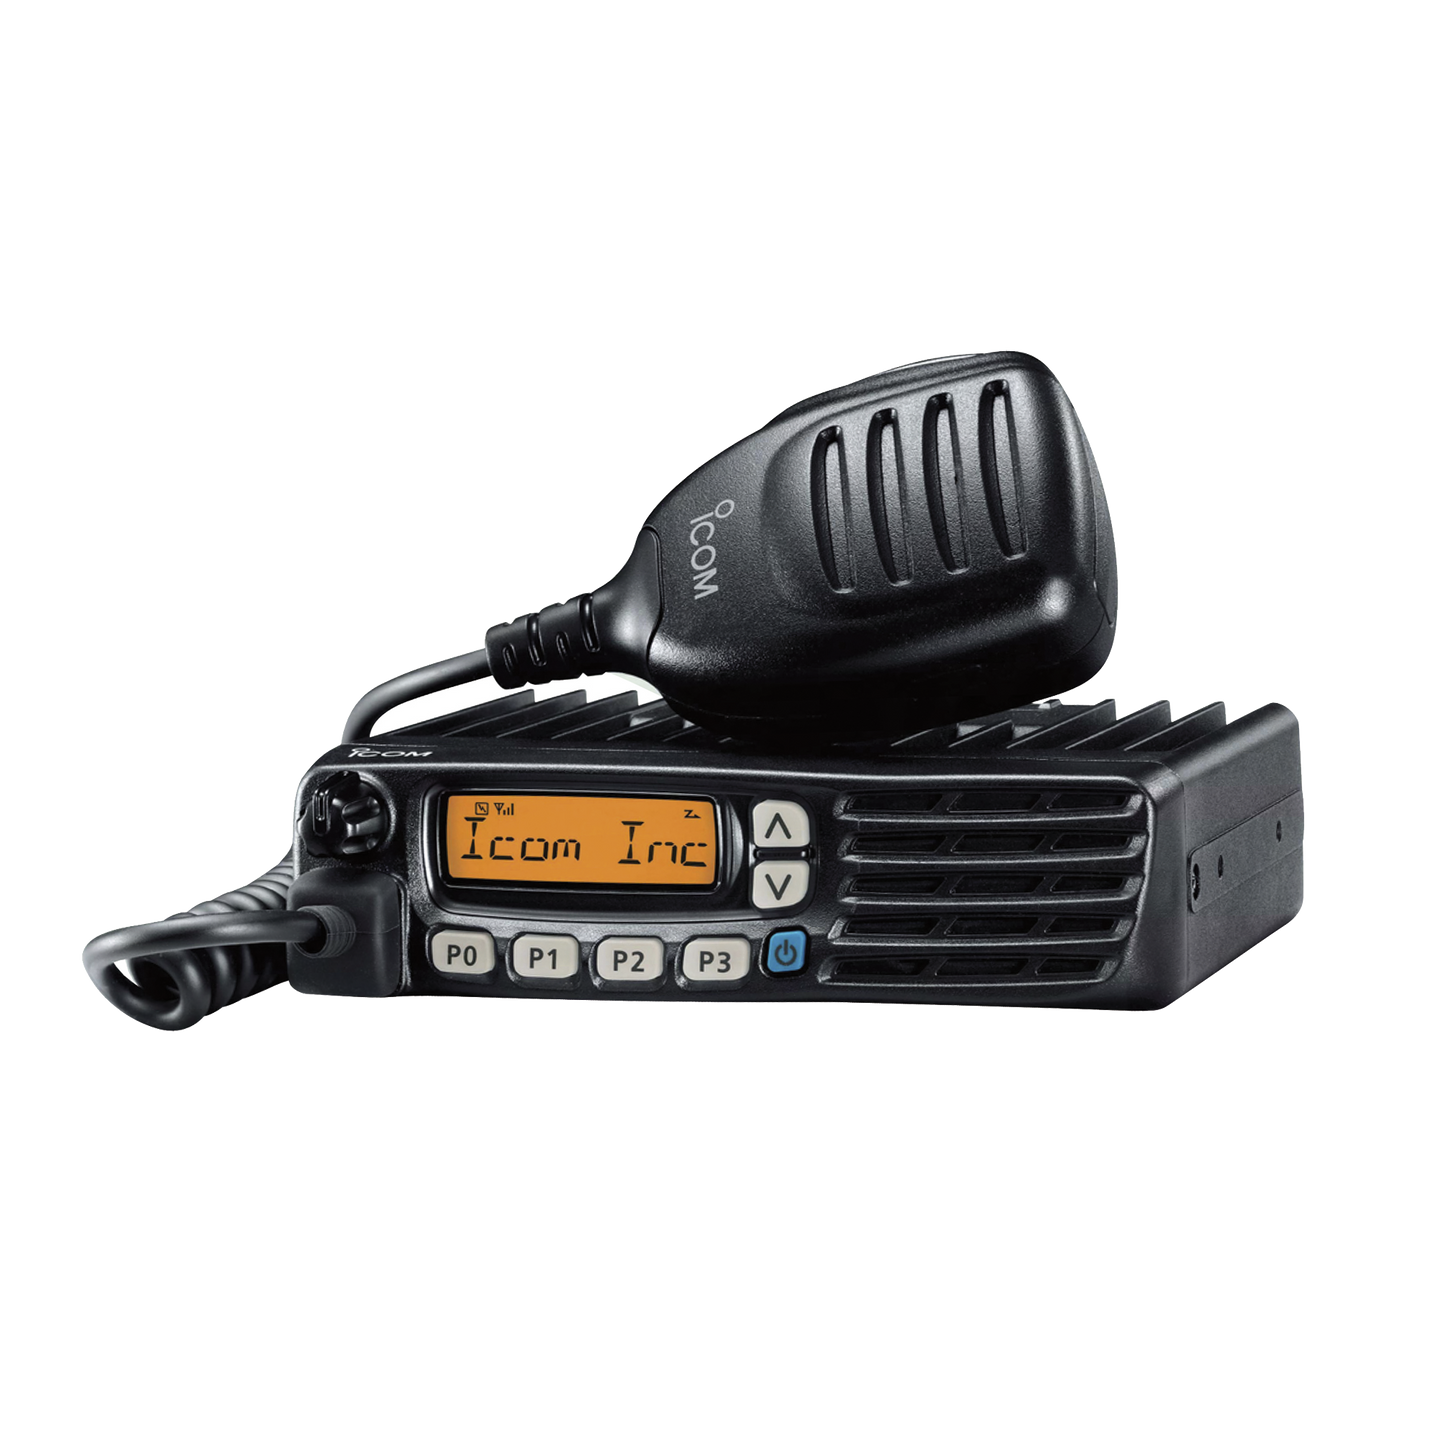 Analog Mobile Radio, 45 W, 400-470MHz, 128 Channels with 8 Character Display comes with MDC-1200 Signaling, 5 Tones, DTMF, Microphone, power cable and mounting bracket included.